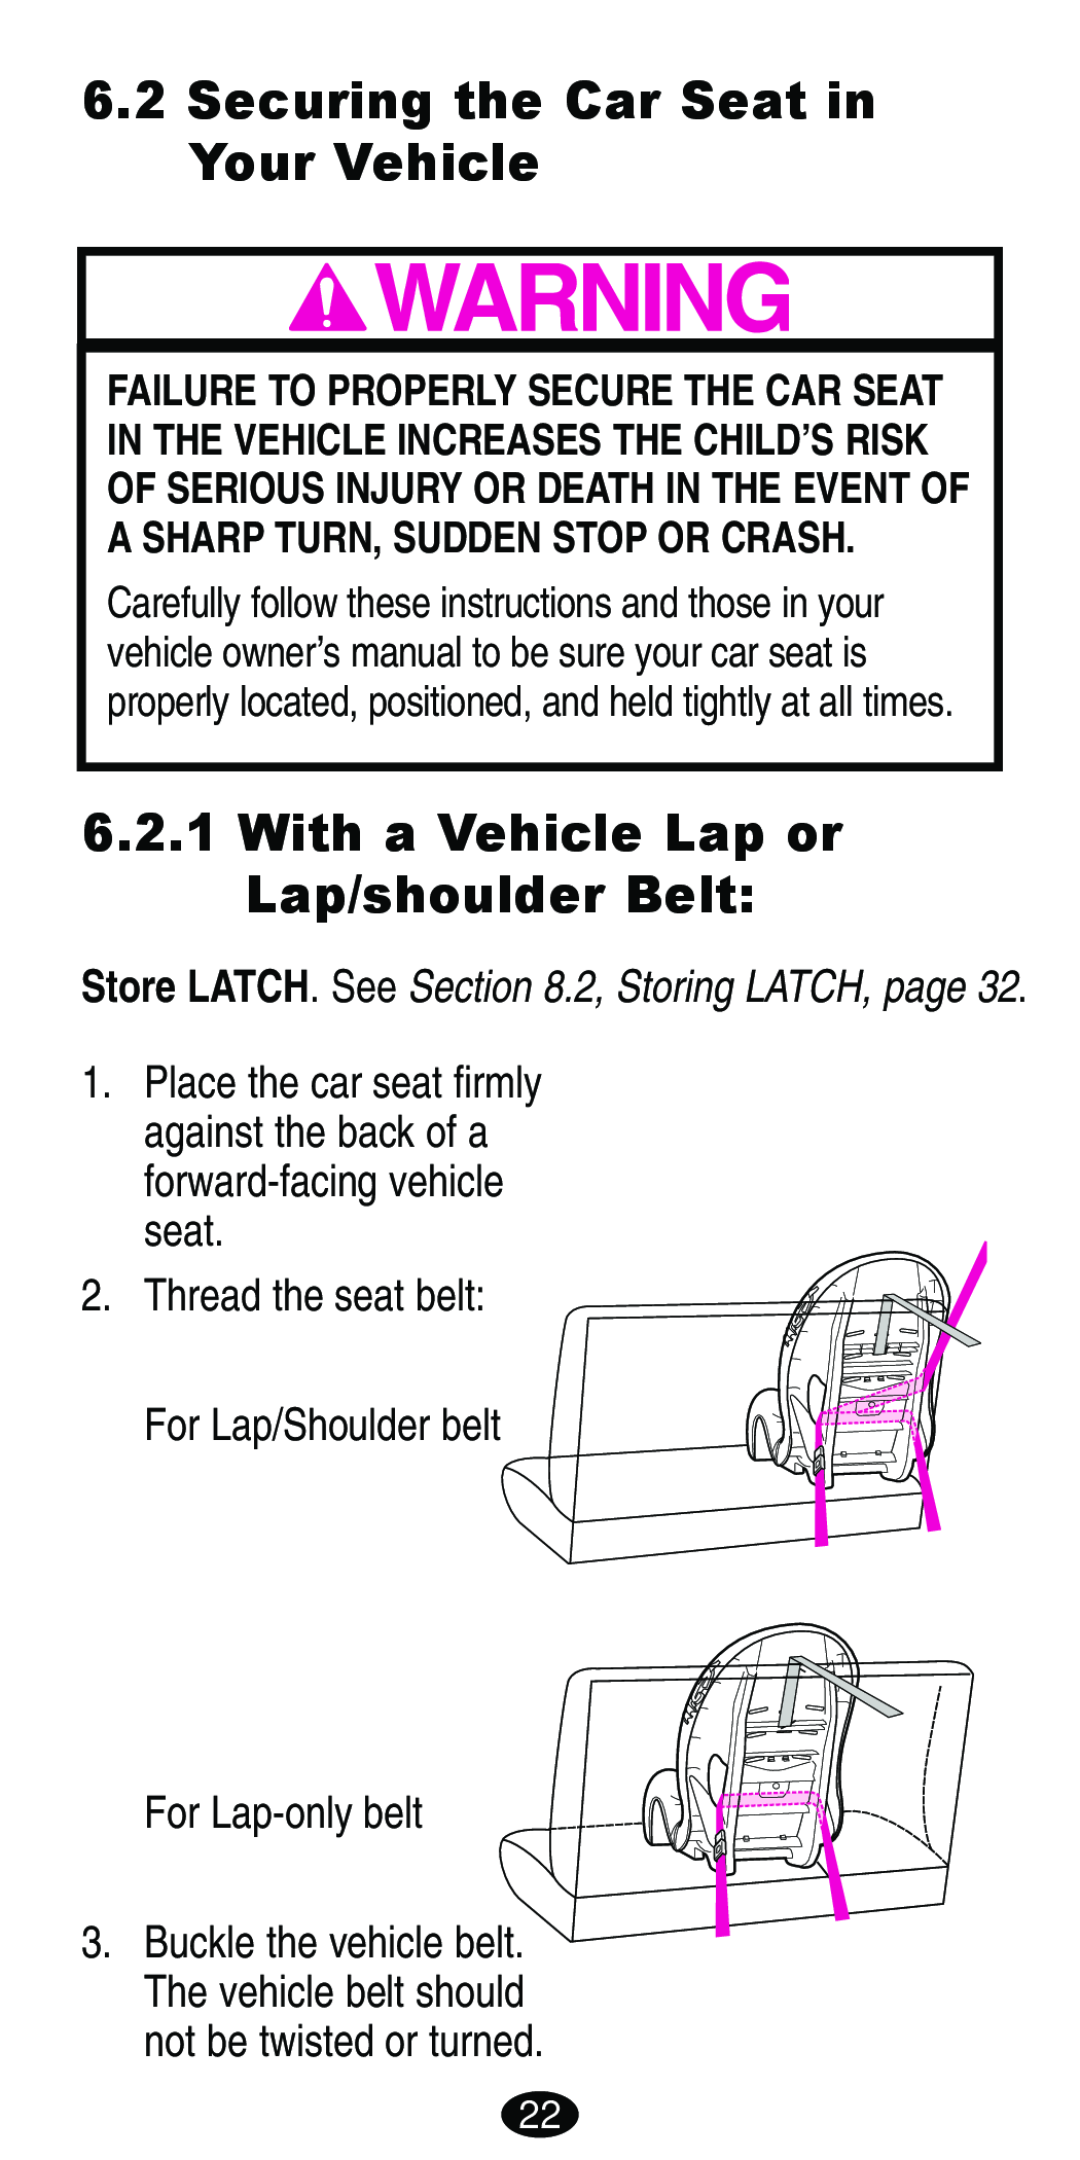 Graco Car Seat/Booster manual Securing the Car Seat in Your Vehicle, With a Vehicle Lap or Lap/shoulder Belt 